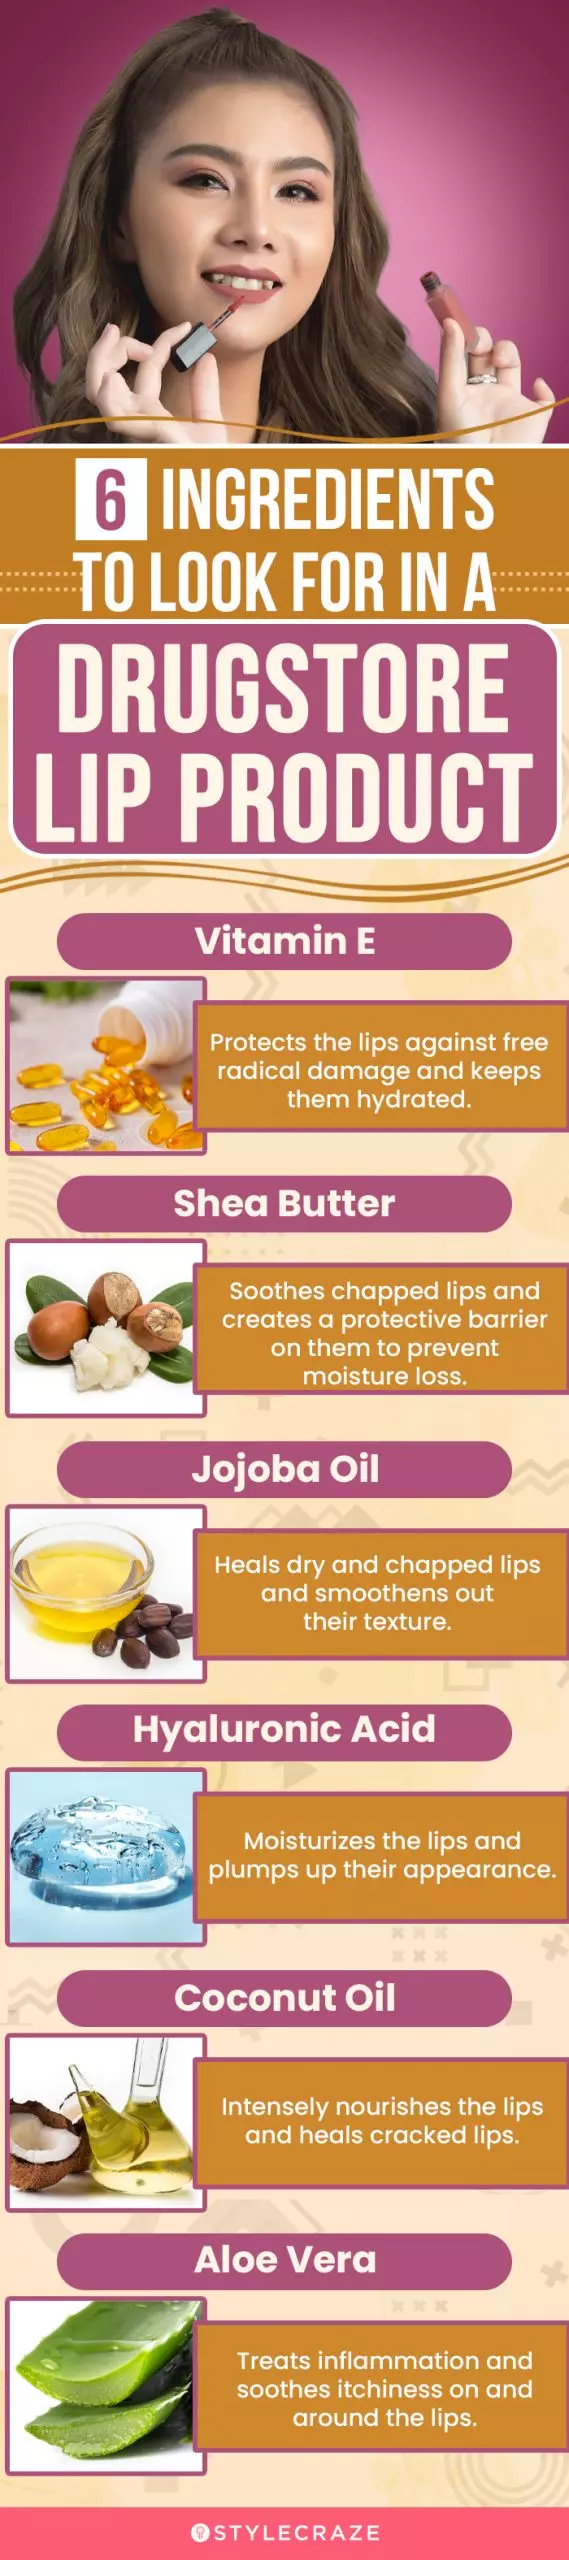 6 Ingredients To Look For In A Drugstore Lip Product (infographic)